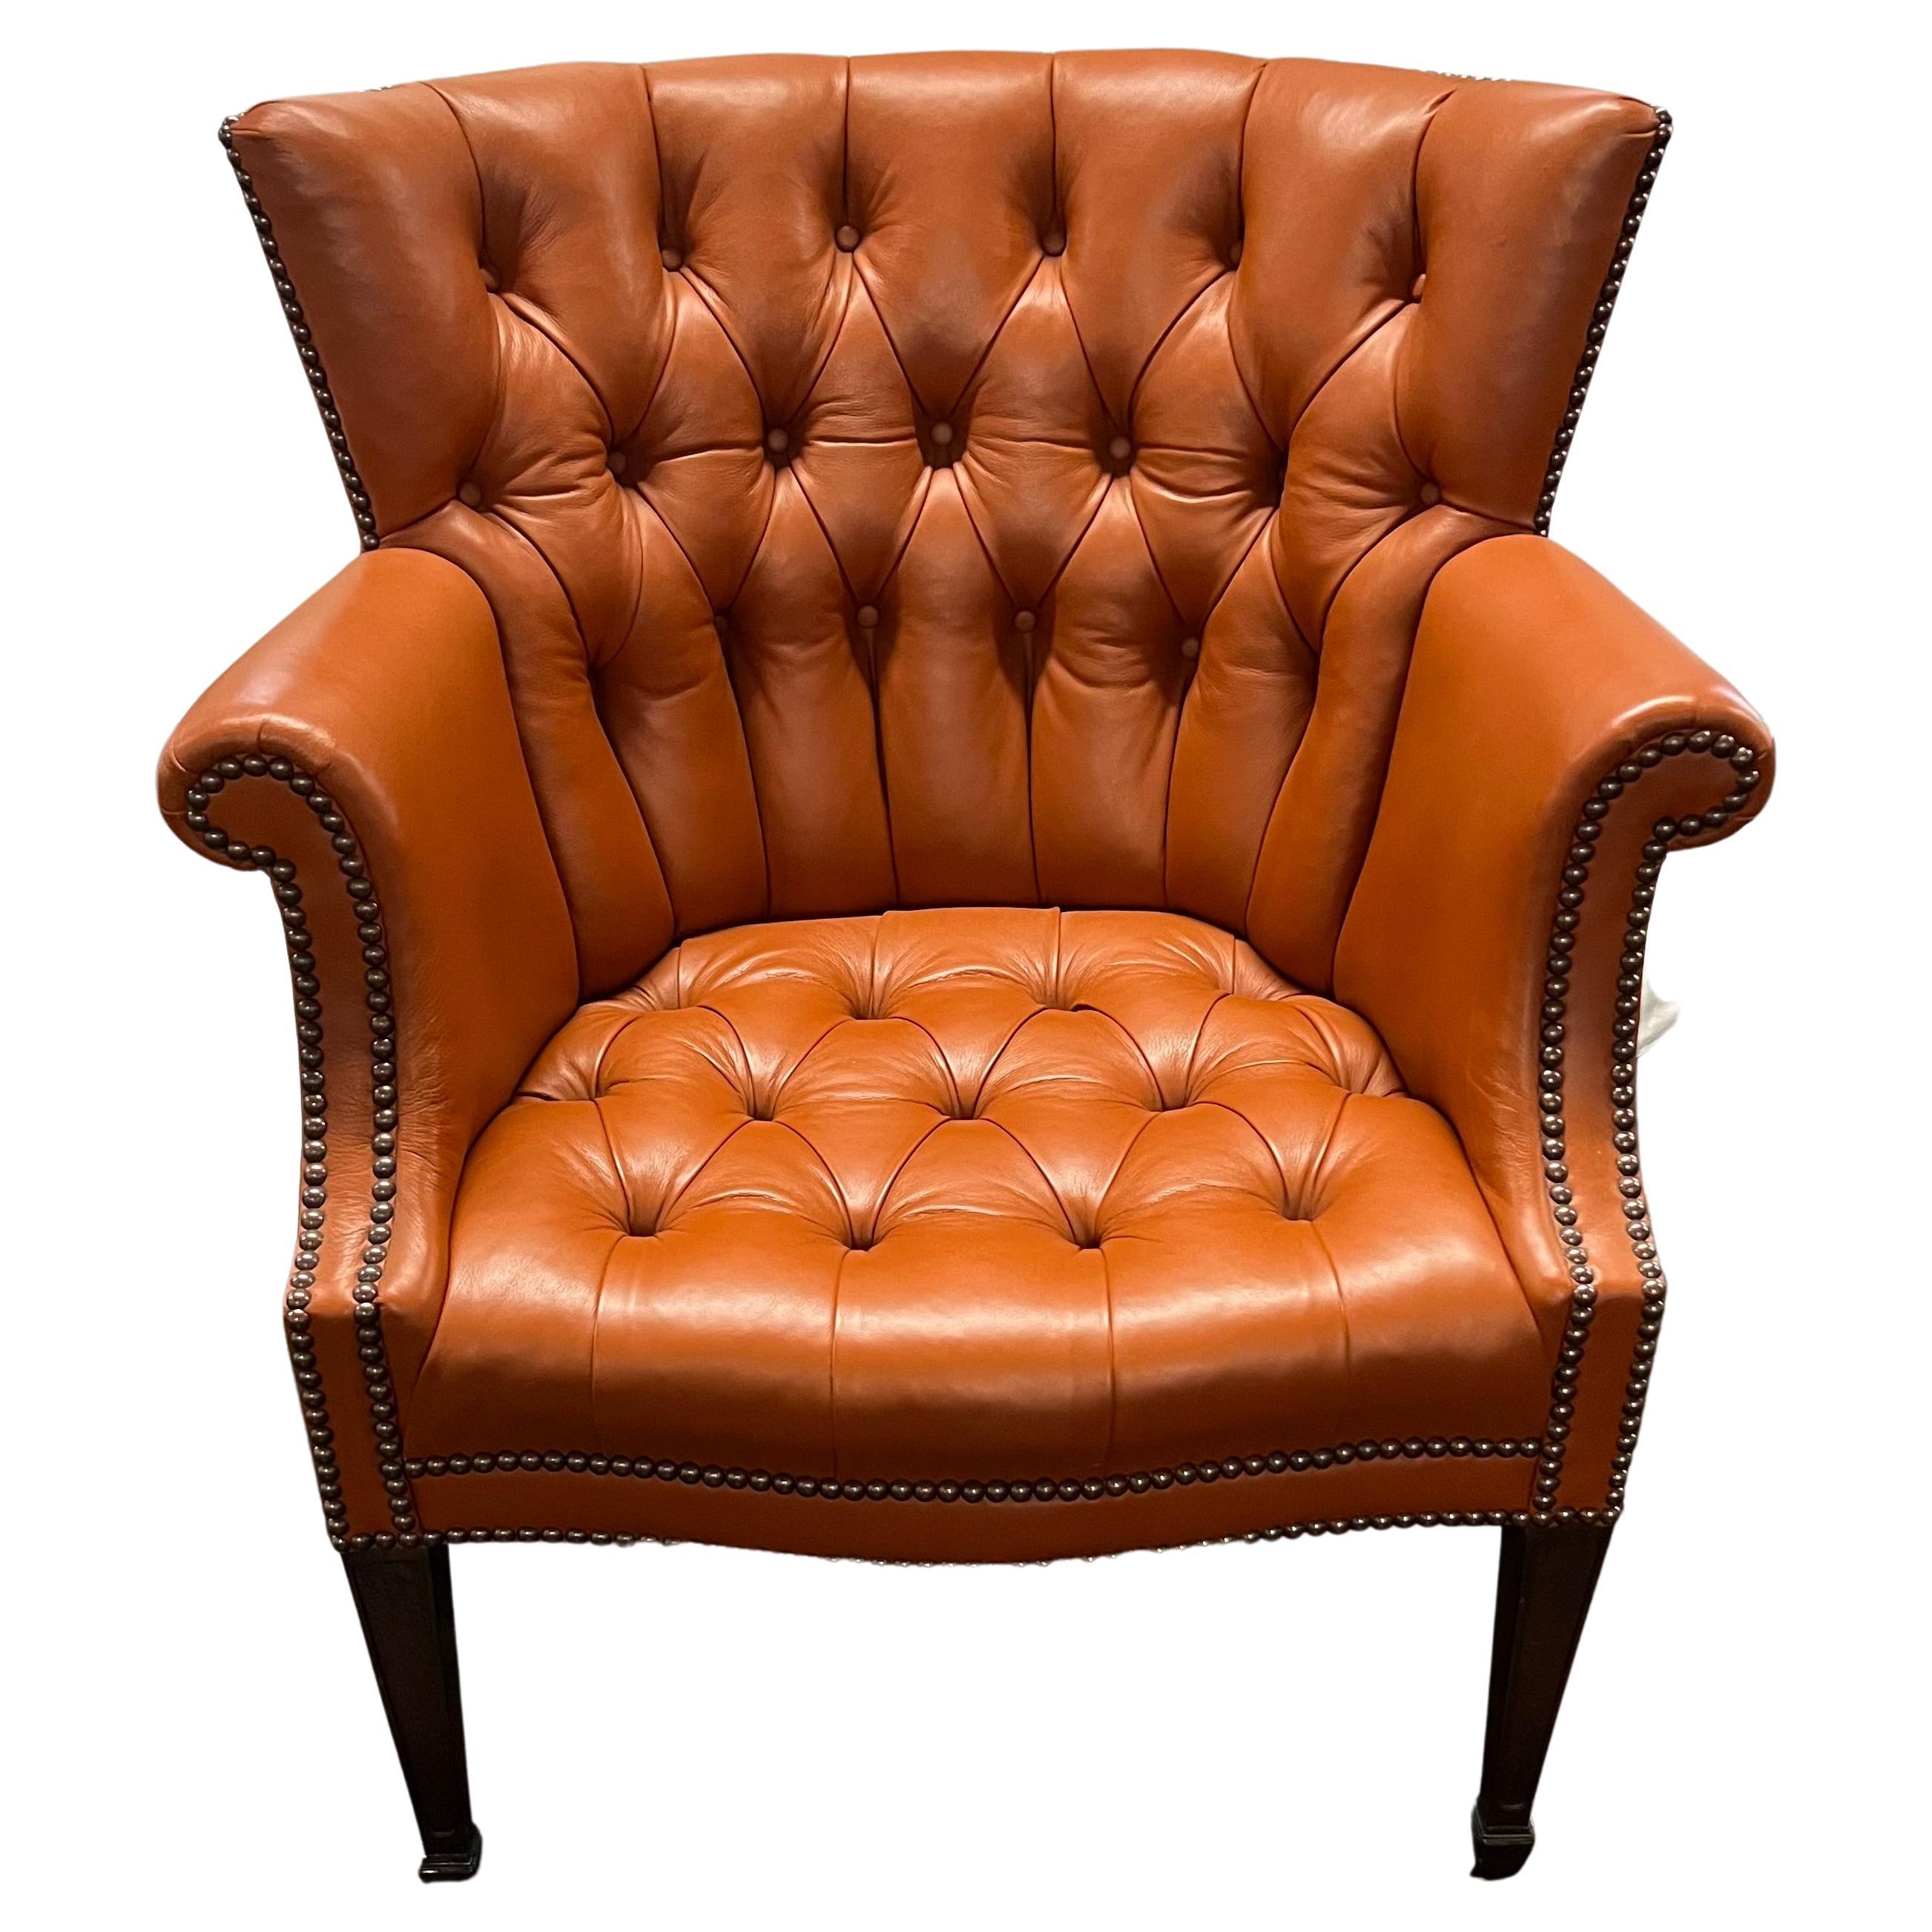 Baker Wing Back Chair in Holly Hunt Spice Colored Leather with Nailhead Trim For Sale